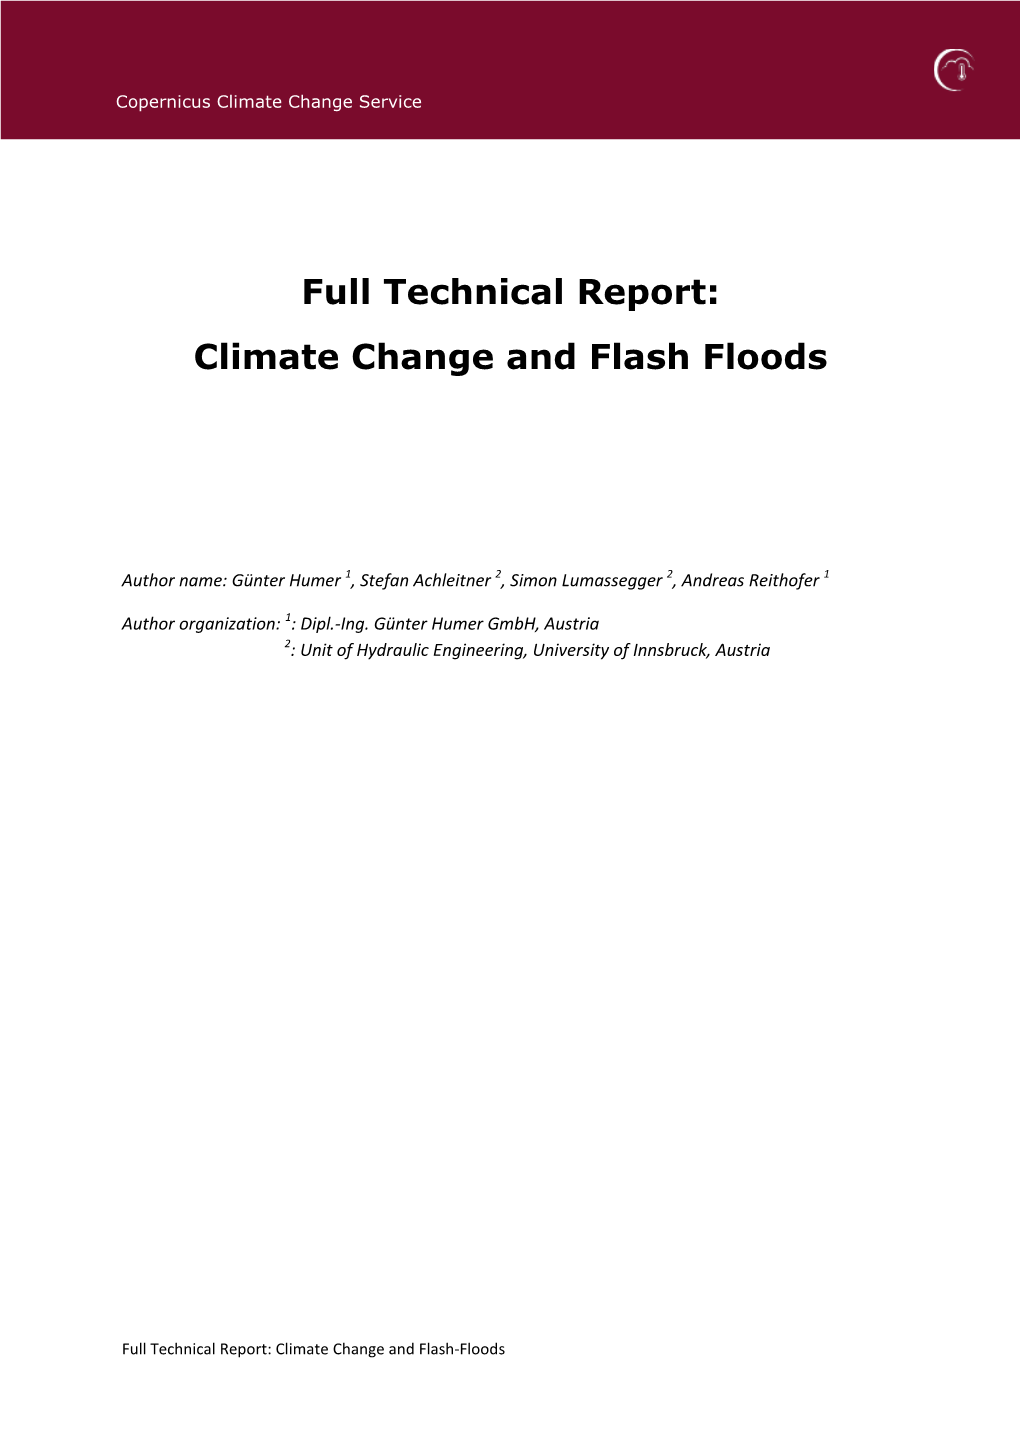 Full Technical Report: Climate Change and Flash Floods